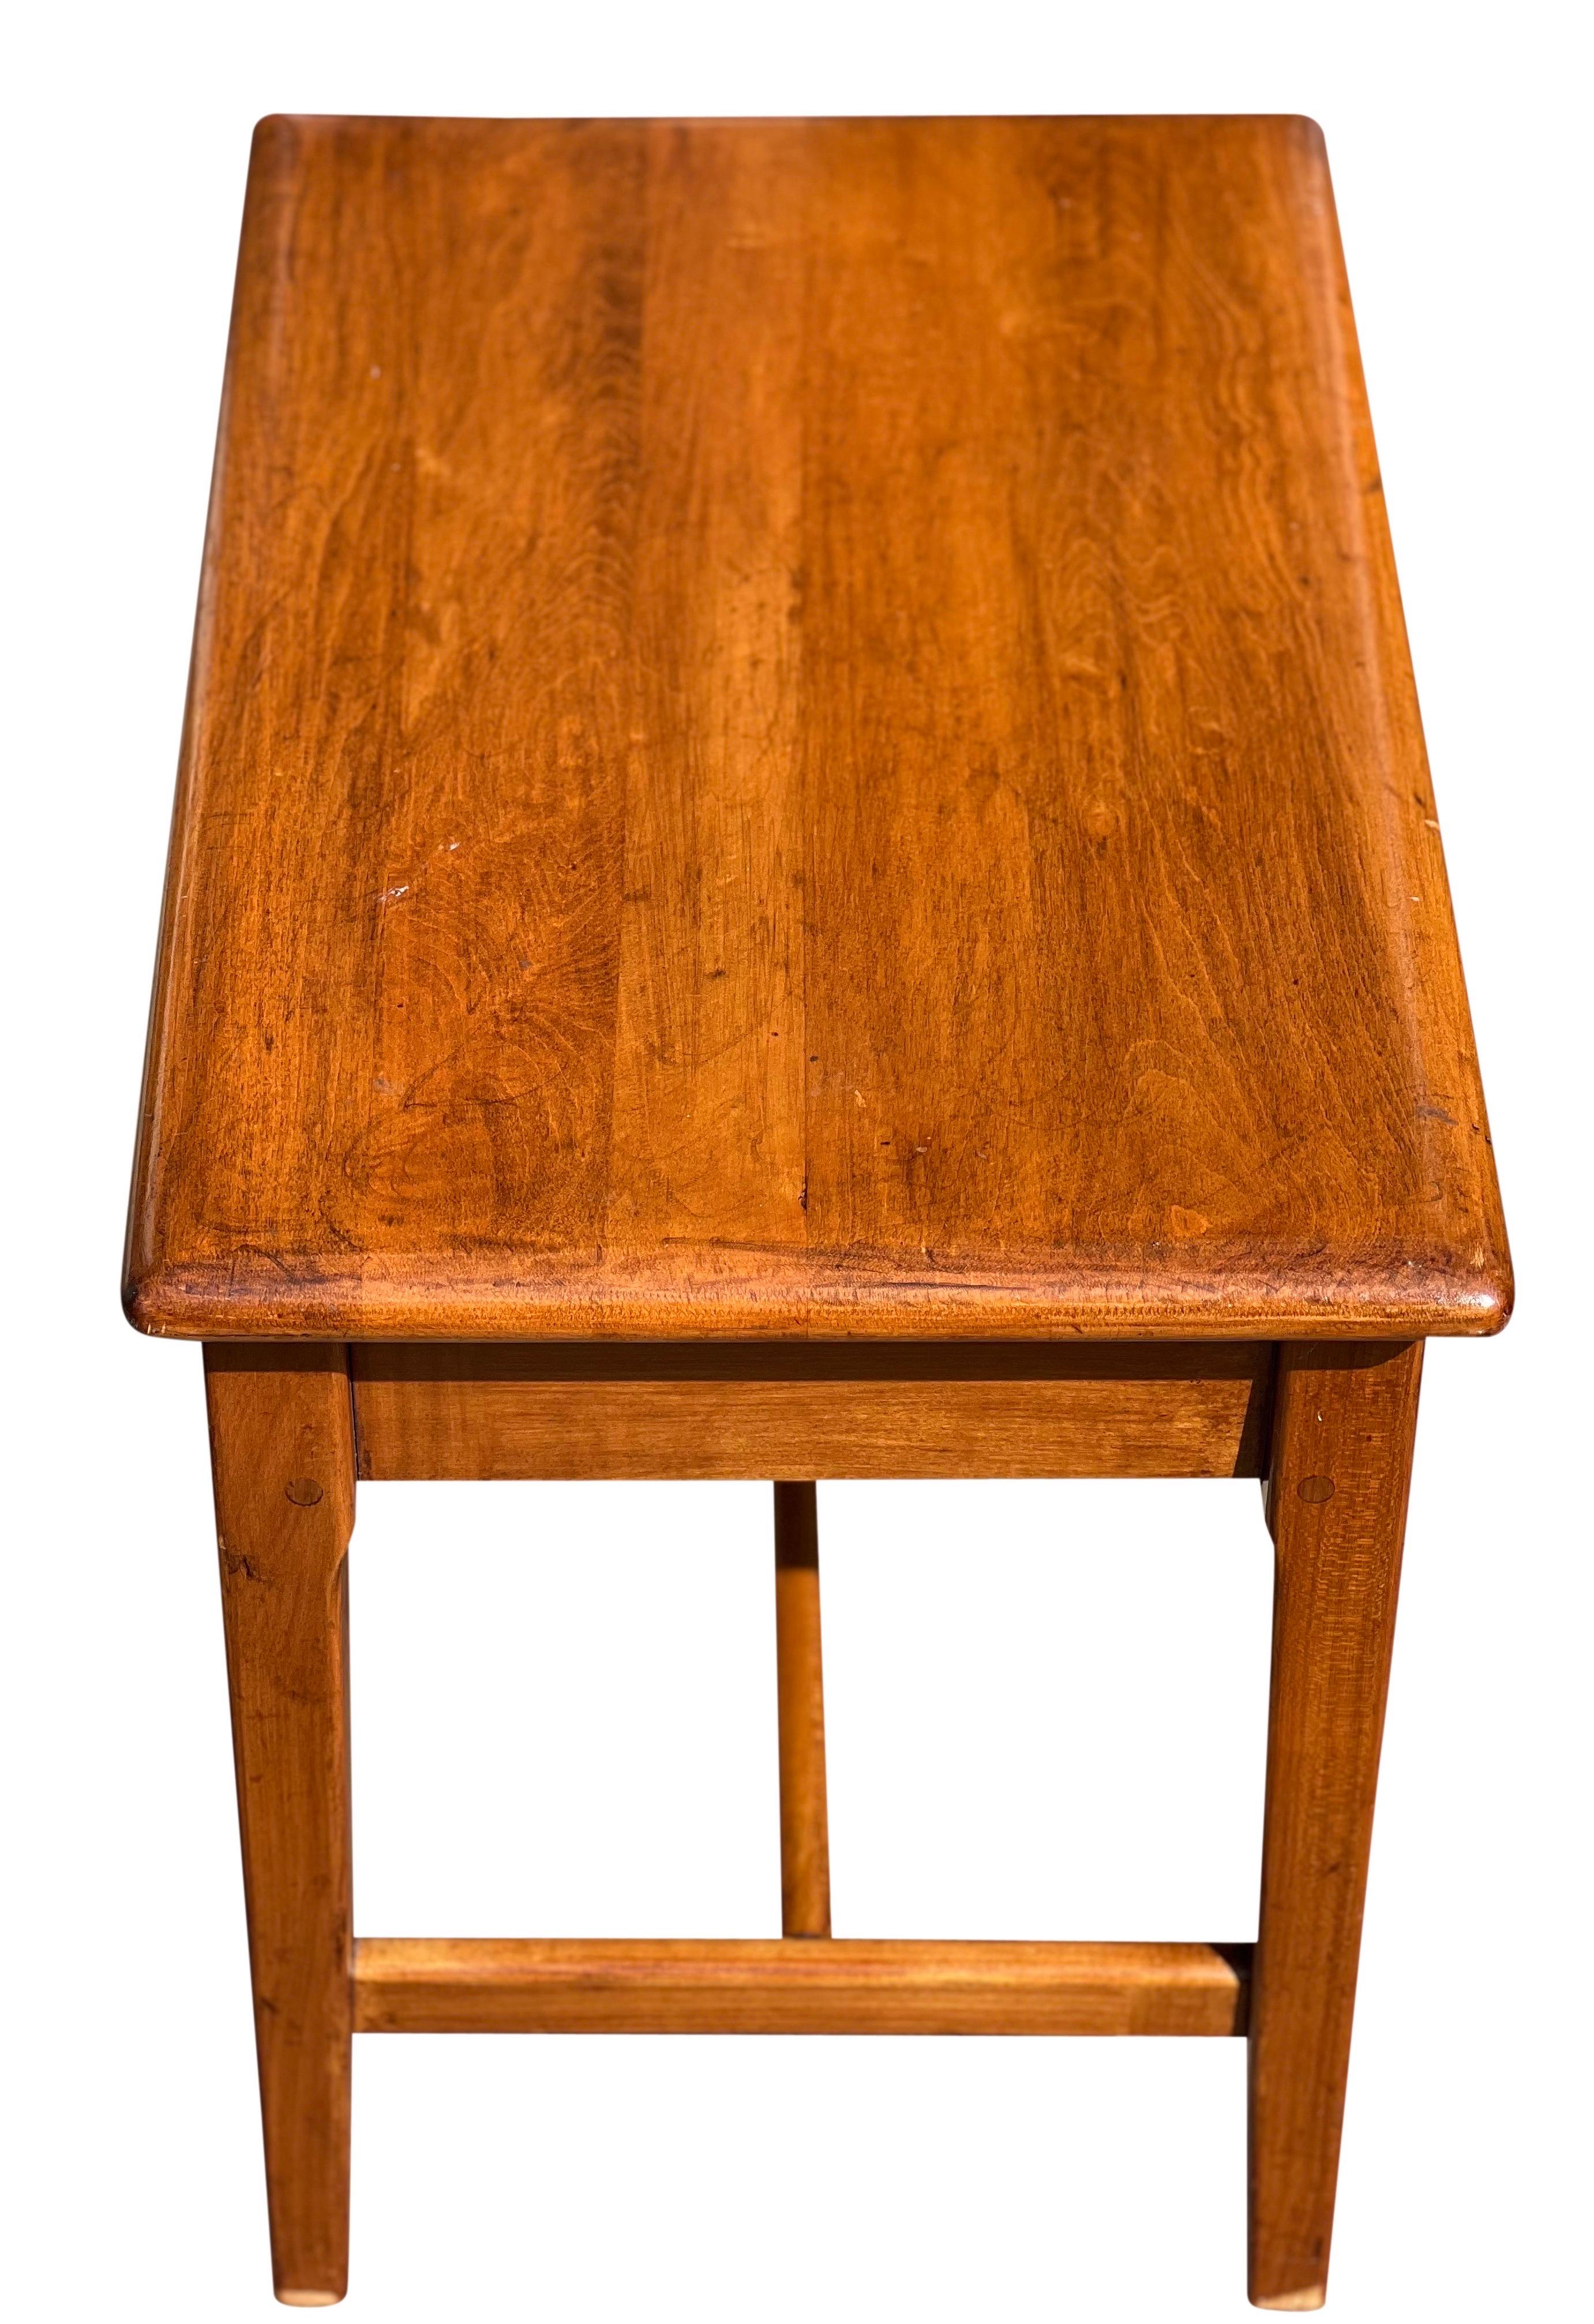 Midcentury Italian Oak Sewing Table or Stool with Single Drawer For Sale 1